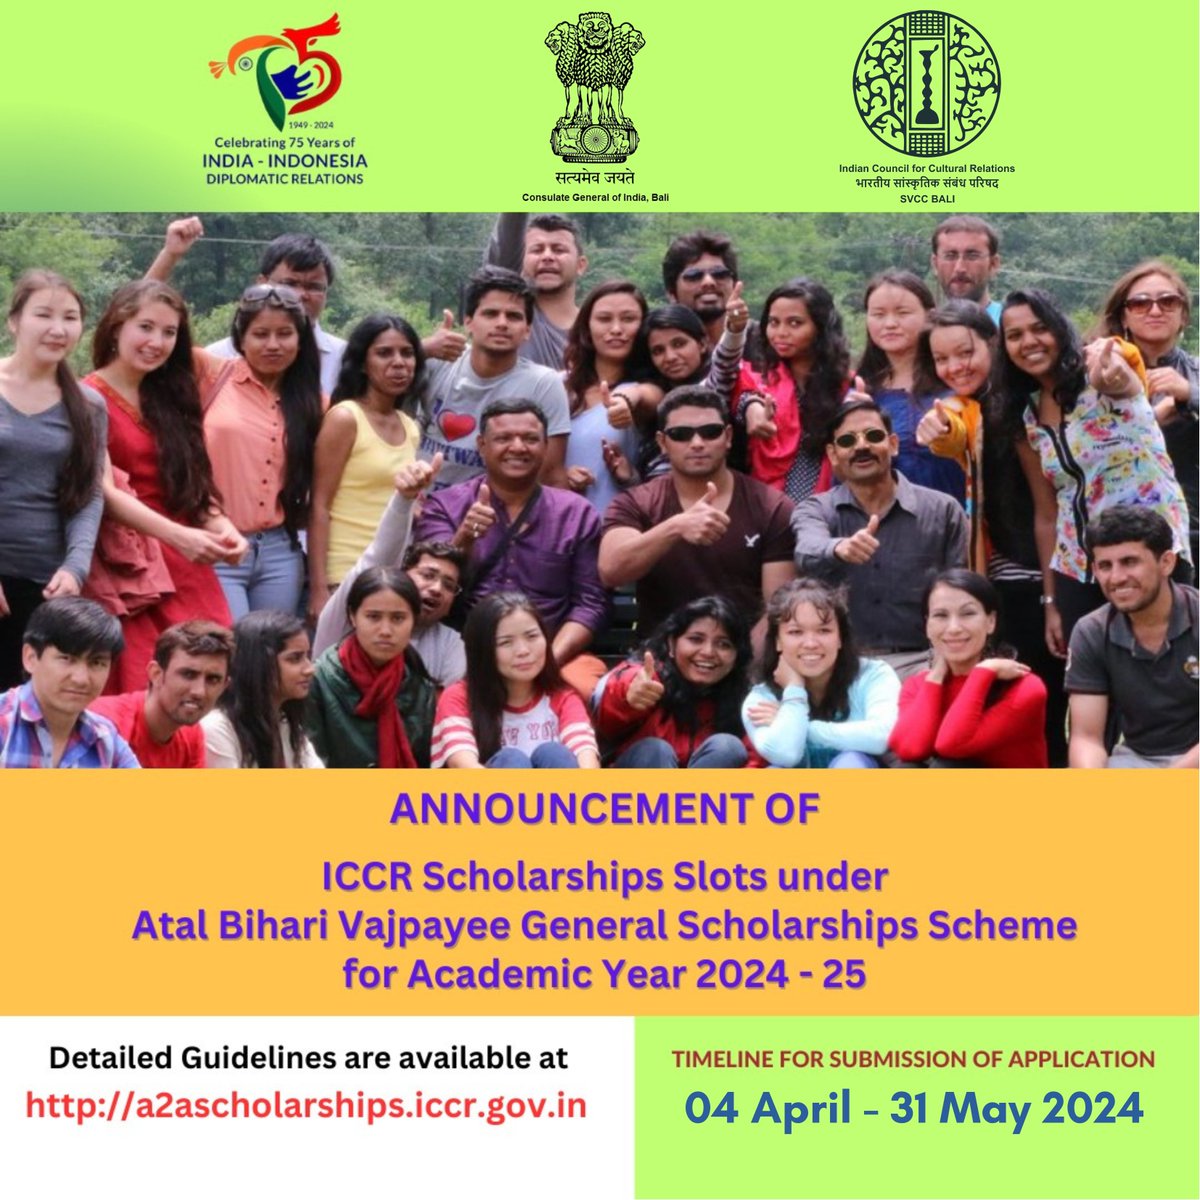 Indian Council for Cultural Relations (ICCR) is offering scholarships for Indonesian students to study in India under 'Atal Bihari Vajpayee General Scholarship Scheme' for Academic Year 2024 – 2025. Portal a2ascholarships.iccr.gov.in Last date to apply: 31 May, 2024.